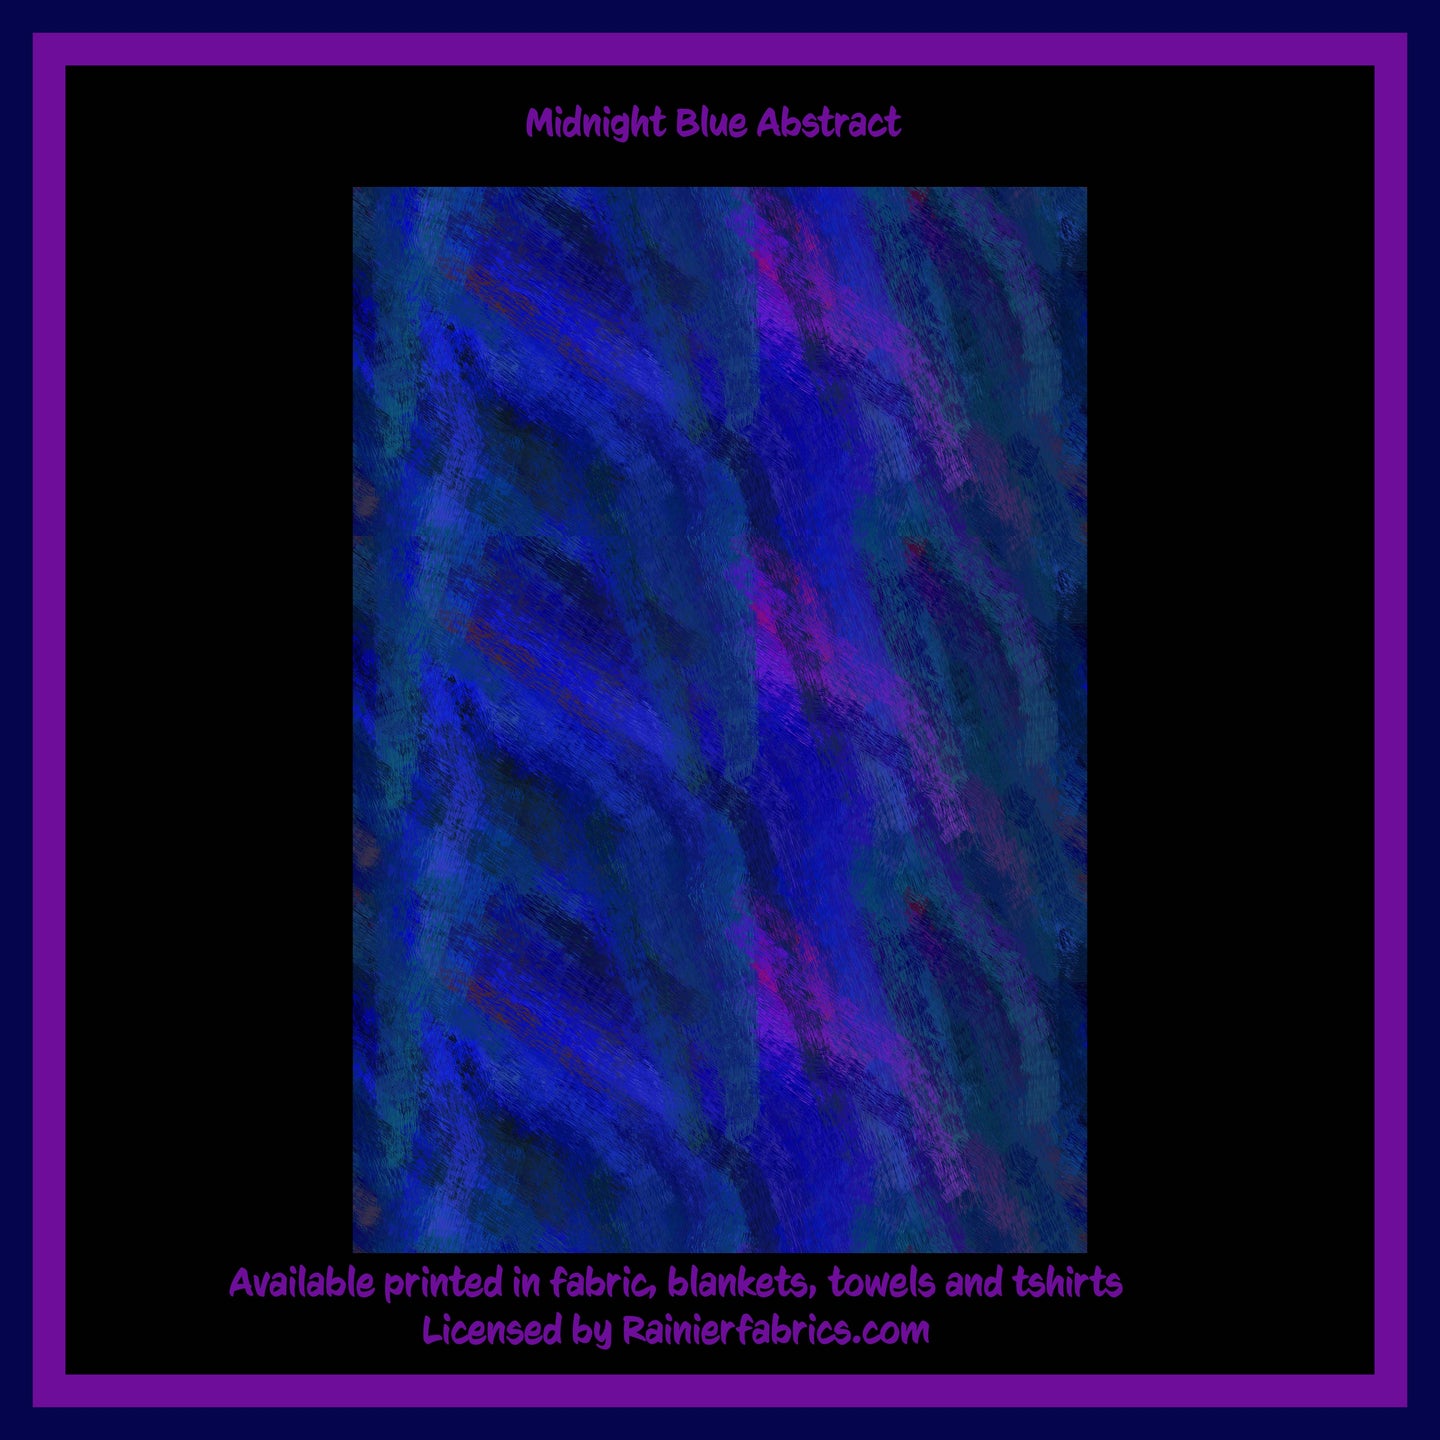 Midnight Blue Abstract - 2-5 day turnaround - Order by 1/2 yard; Description of bases below